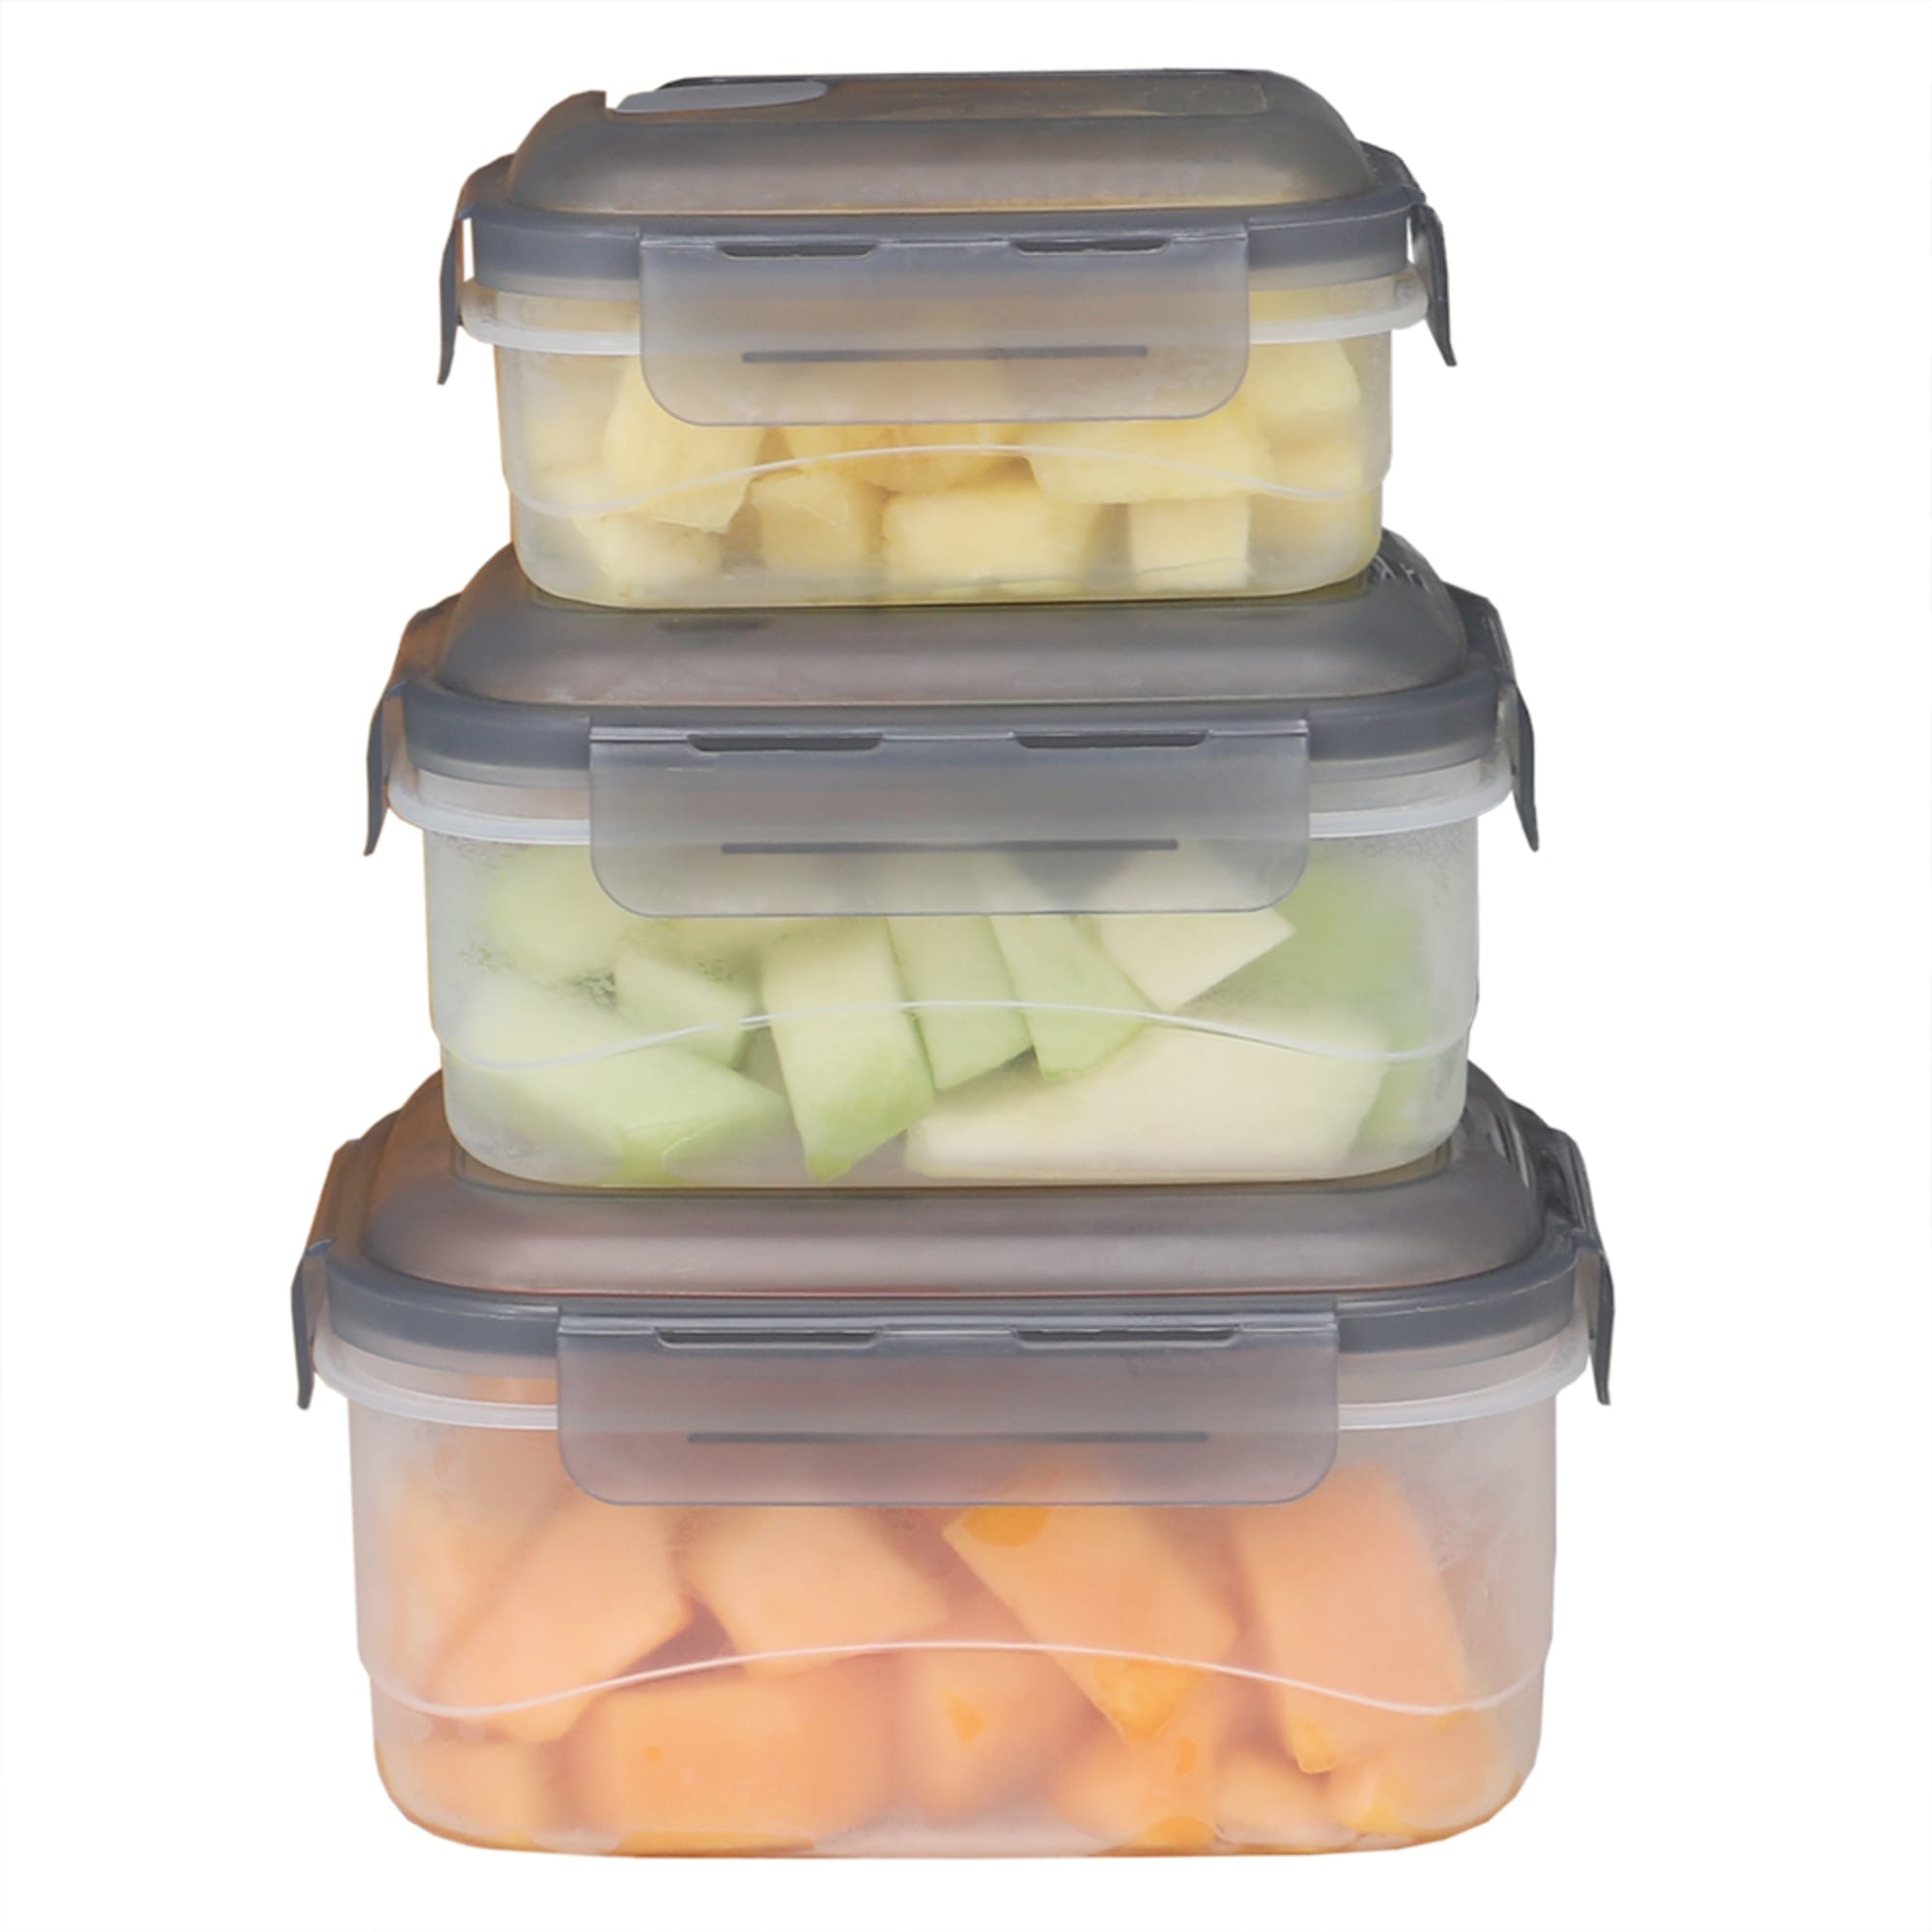 Home Basics Locking Rectangle Food Storage Containers with Grey Steam Vented Lids, (Set of 6) $6.00 EACH, CASE PACK OF 12